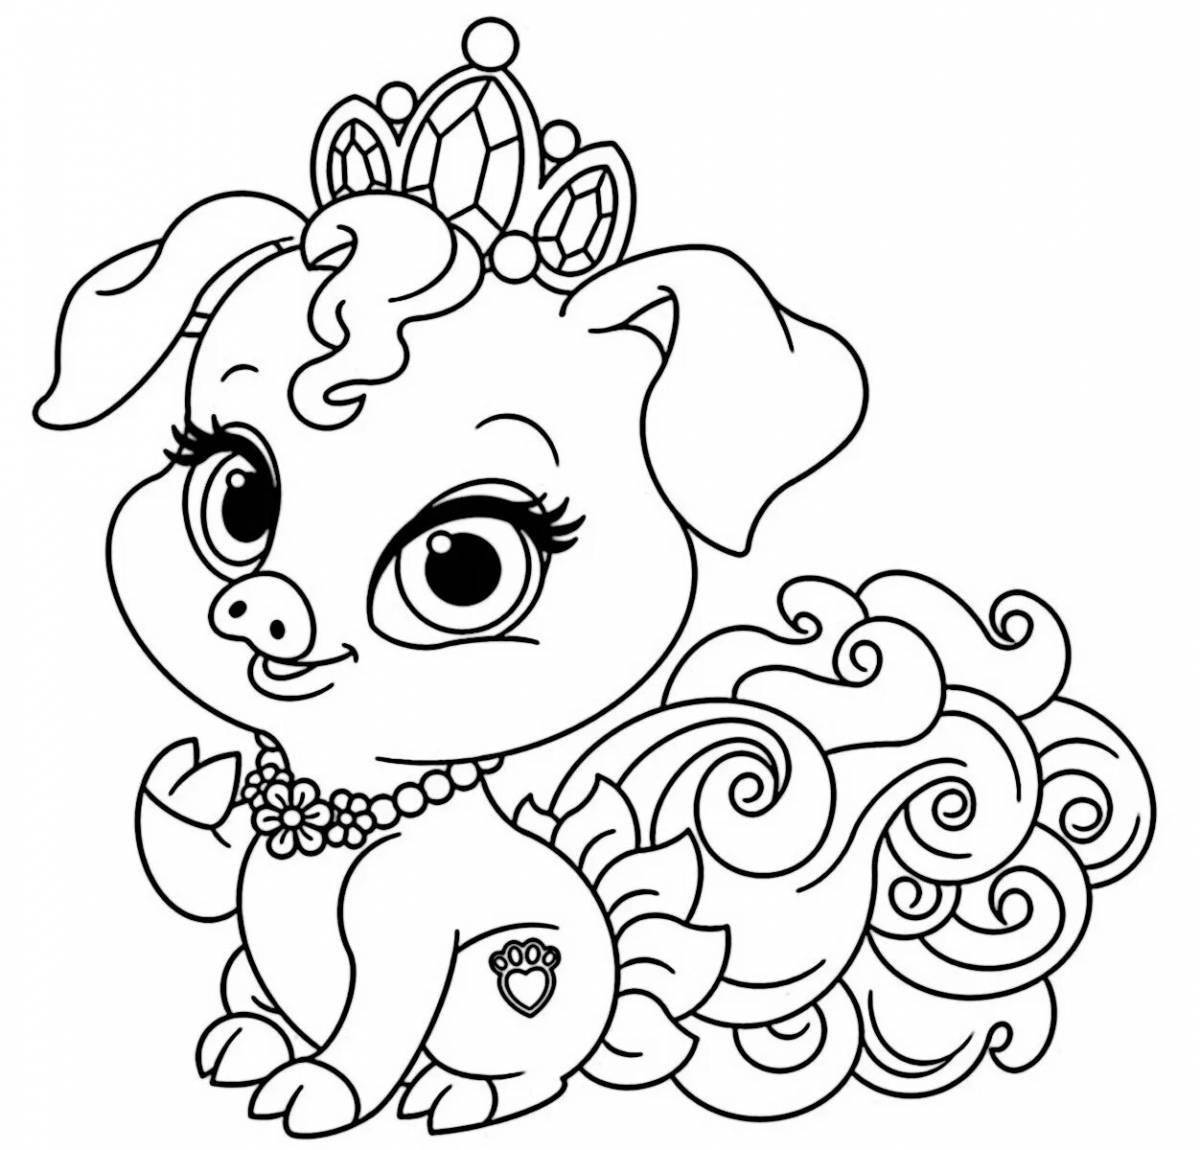 Radiant super pets coloring page